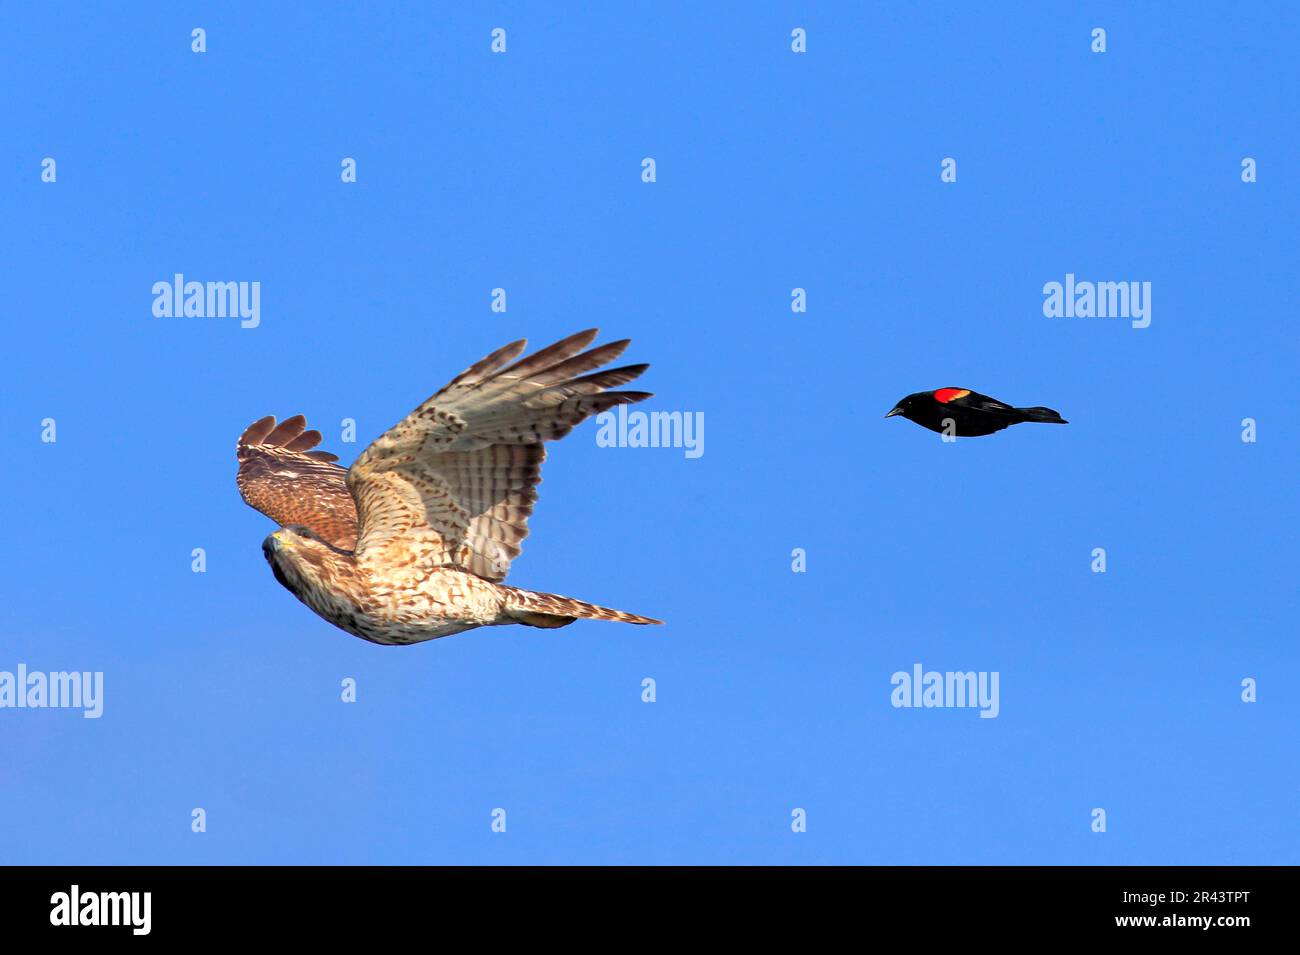 Cooper's hawk (Accipiter cooperii), adult flying being attacked by red-winged blackbird (Agelaius phoeniceus), Wakodahatchee Wetlands, Delray Beach Stock Photo